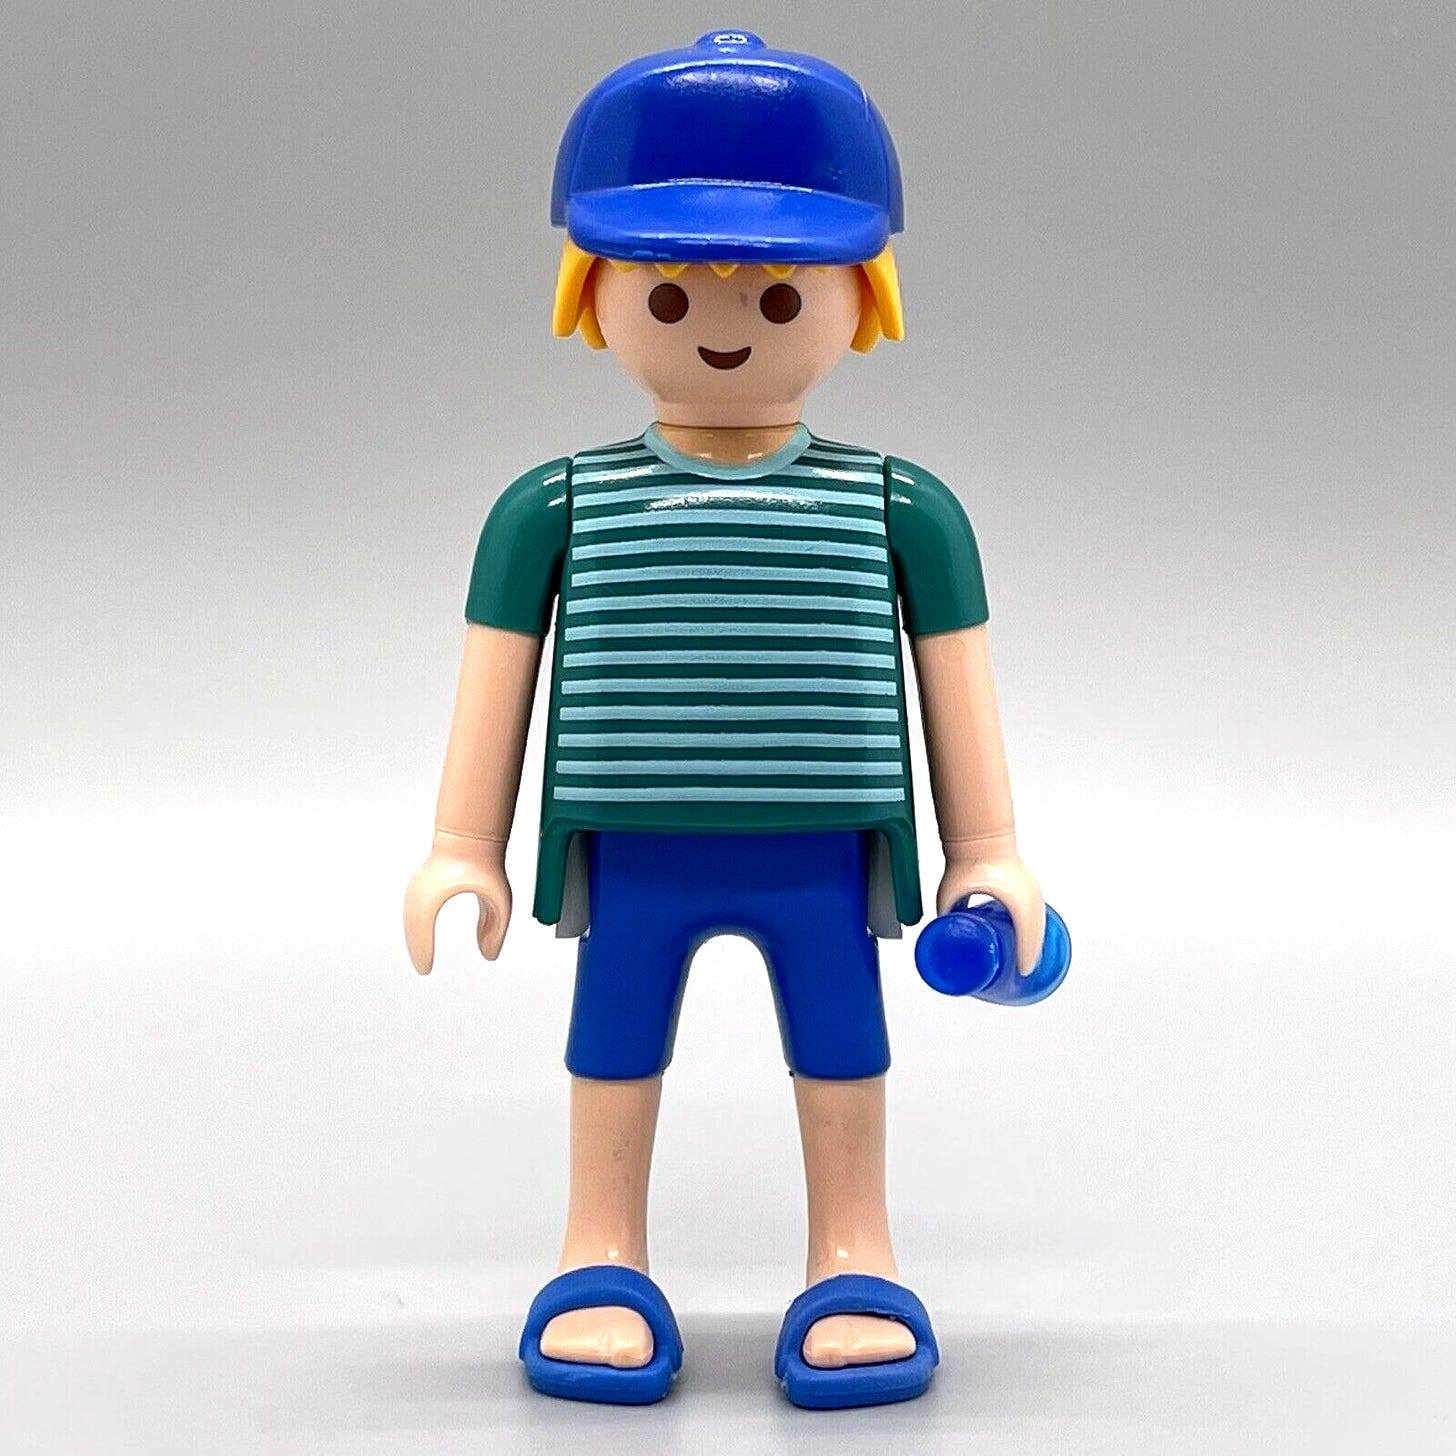 Playmobil Male Adult Figure Green Striped Shirt Blond Hair Blue Hat Sandals - Picture 1 of 2